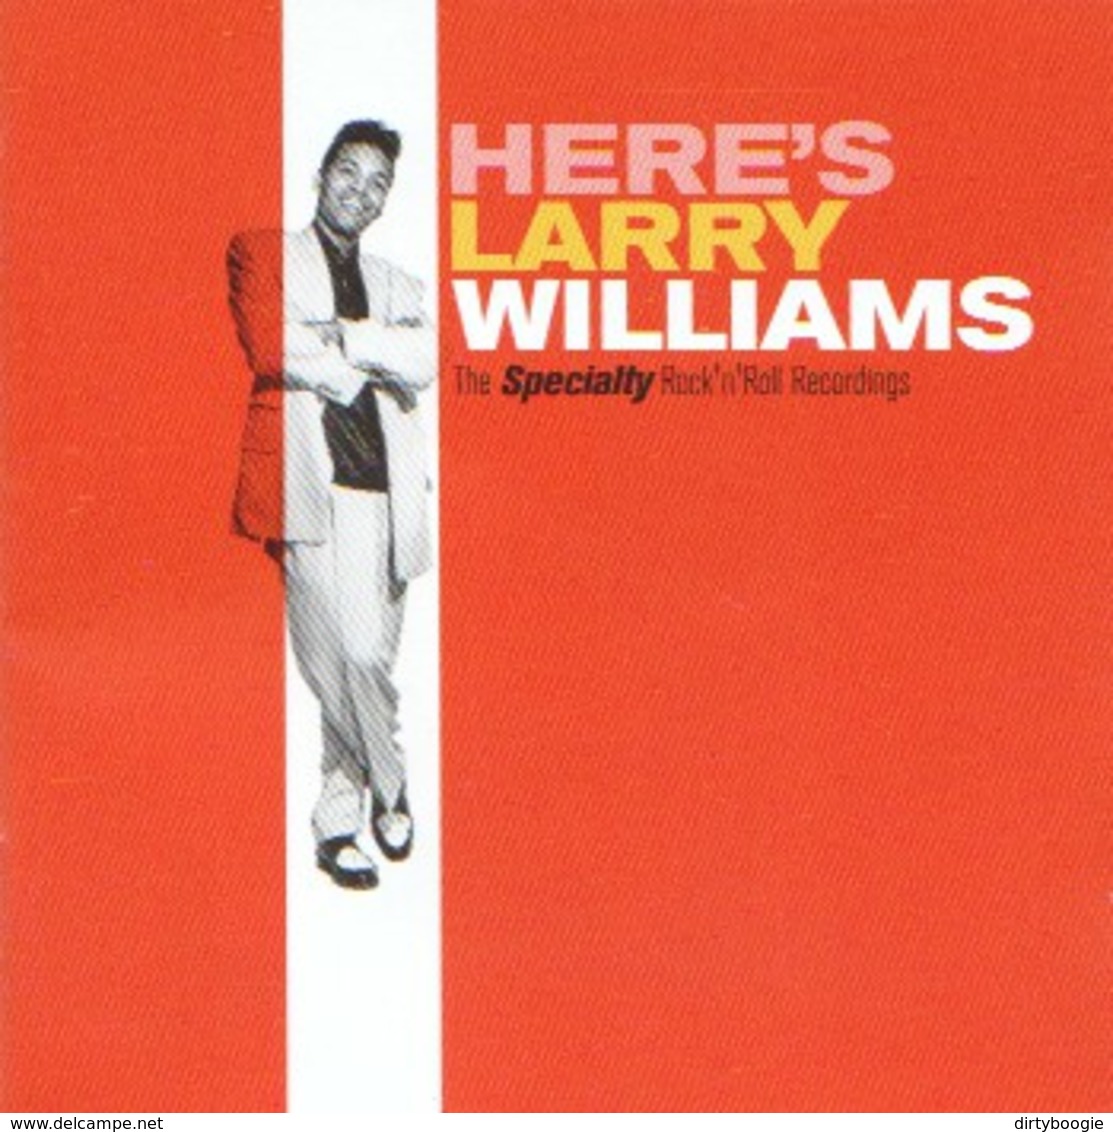 Larry WILLIAMS - The Specialty Rock'n'roll Recordings - CD - HOODOO RECORDS - Rock